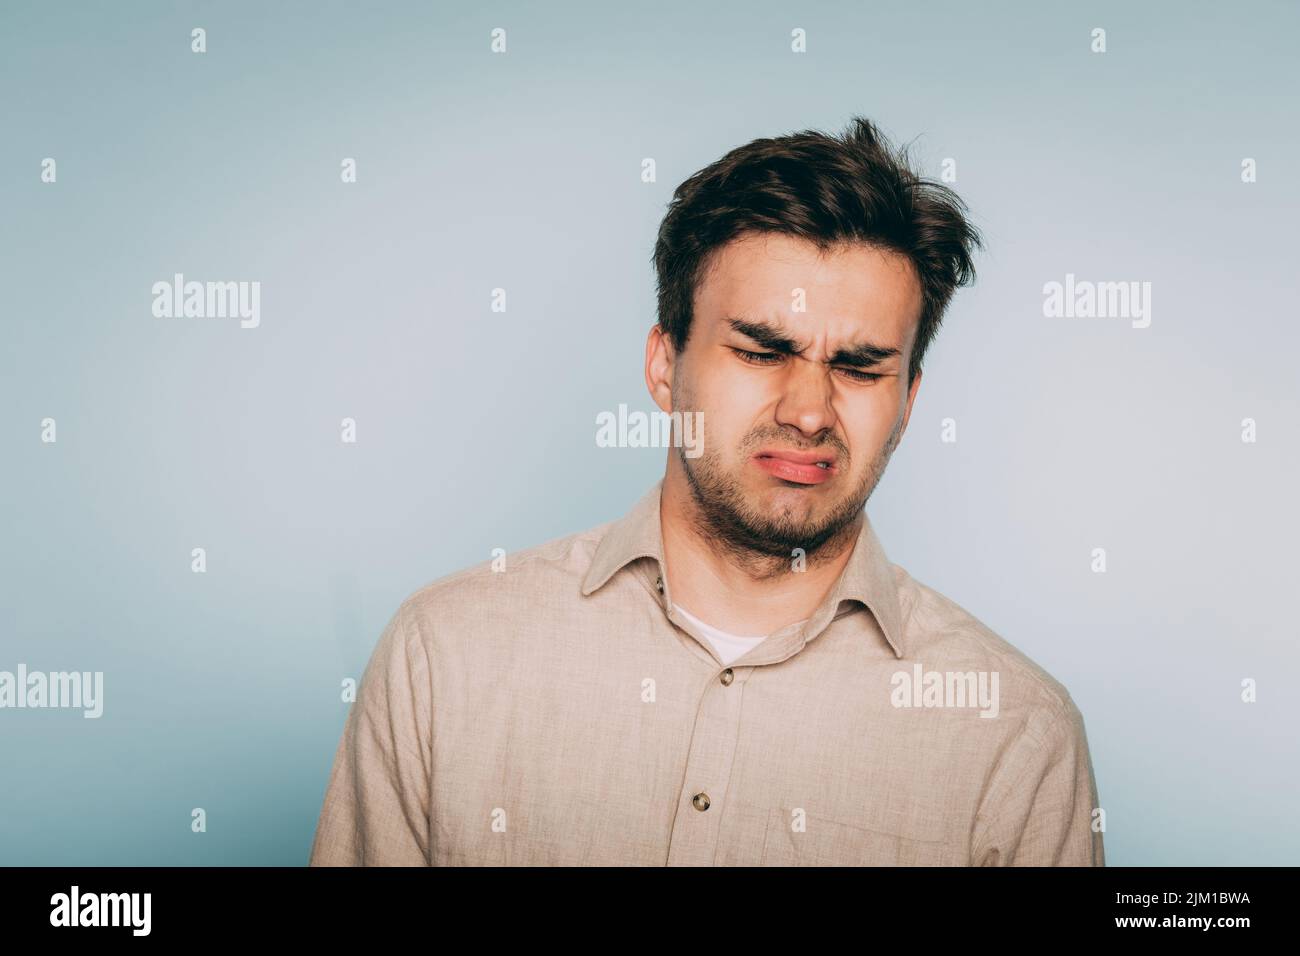 nausea repulsion reluctant man grimace disgust Stock Photo